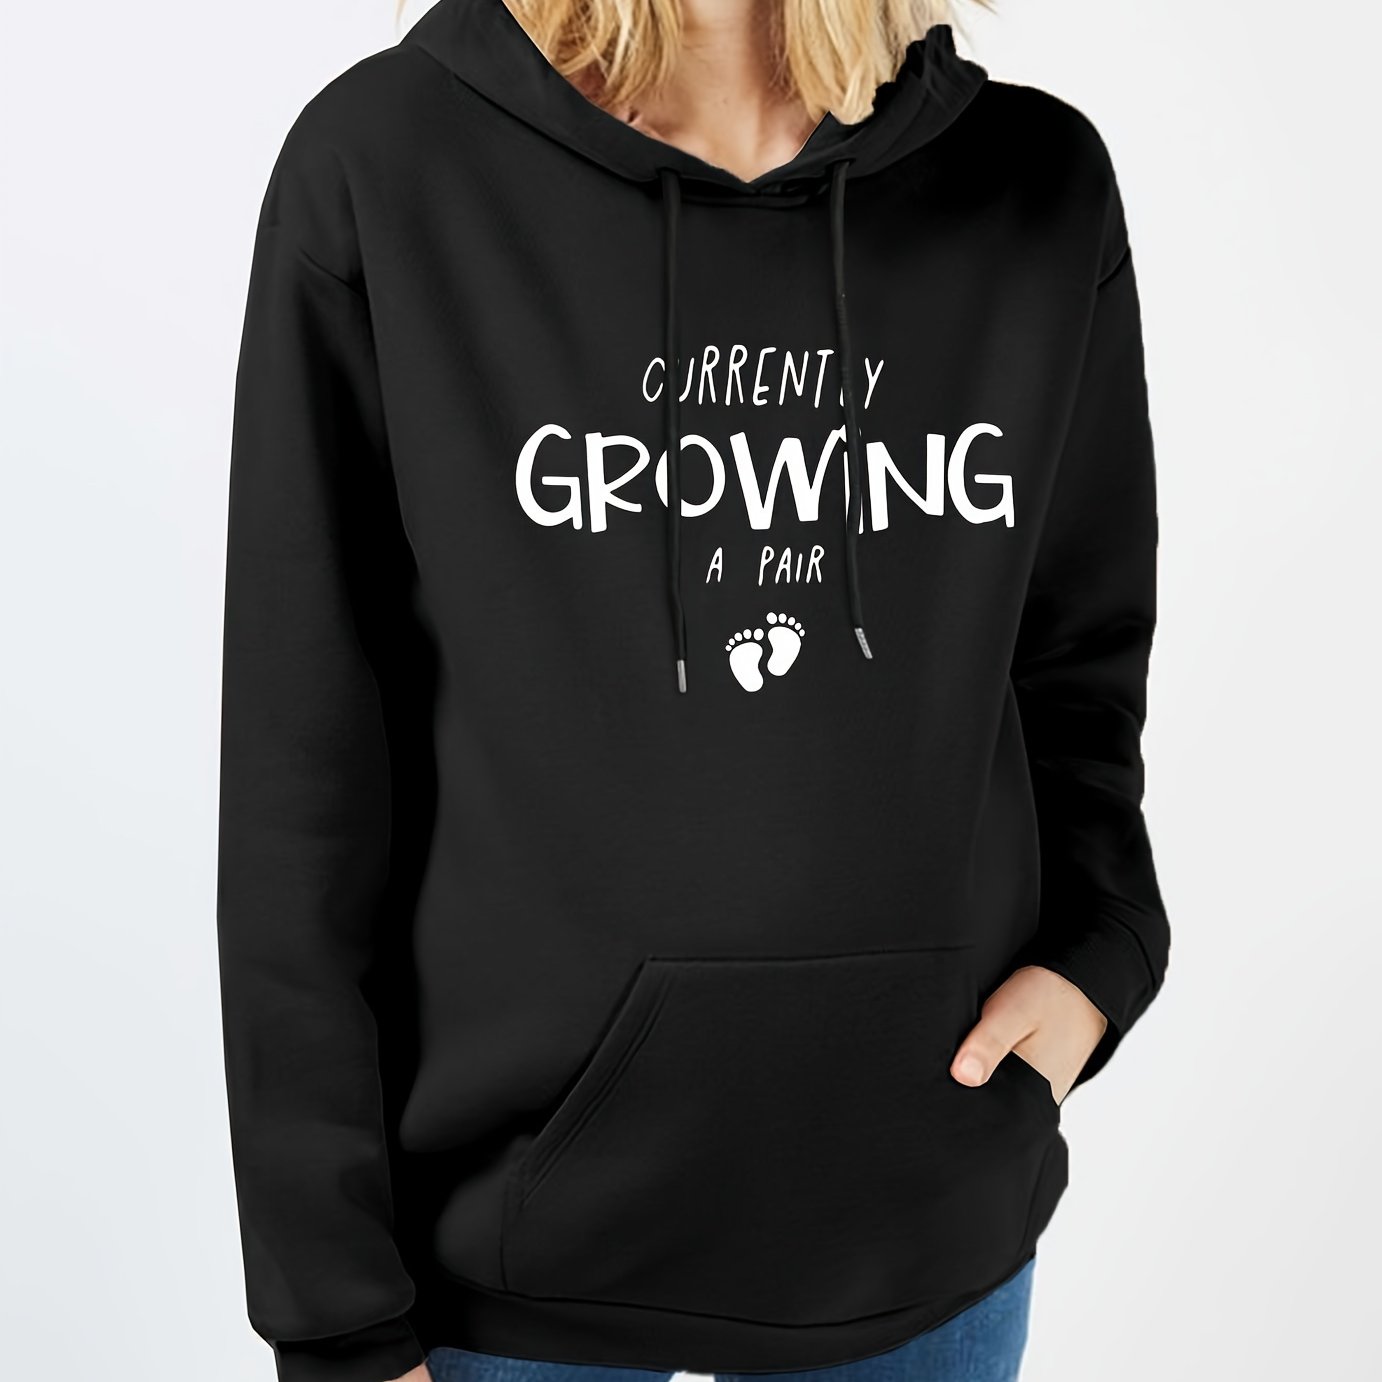 Currently Growing A Pair Women's Maternity Pullover Hooded Sweatshirt claimedbygoddesigns